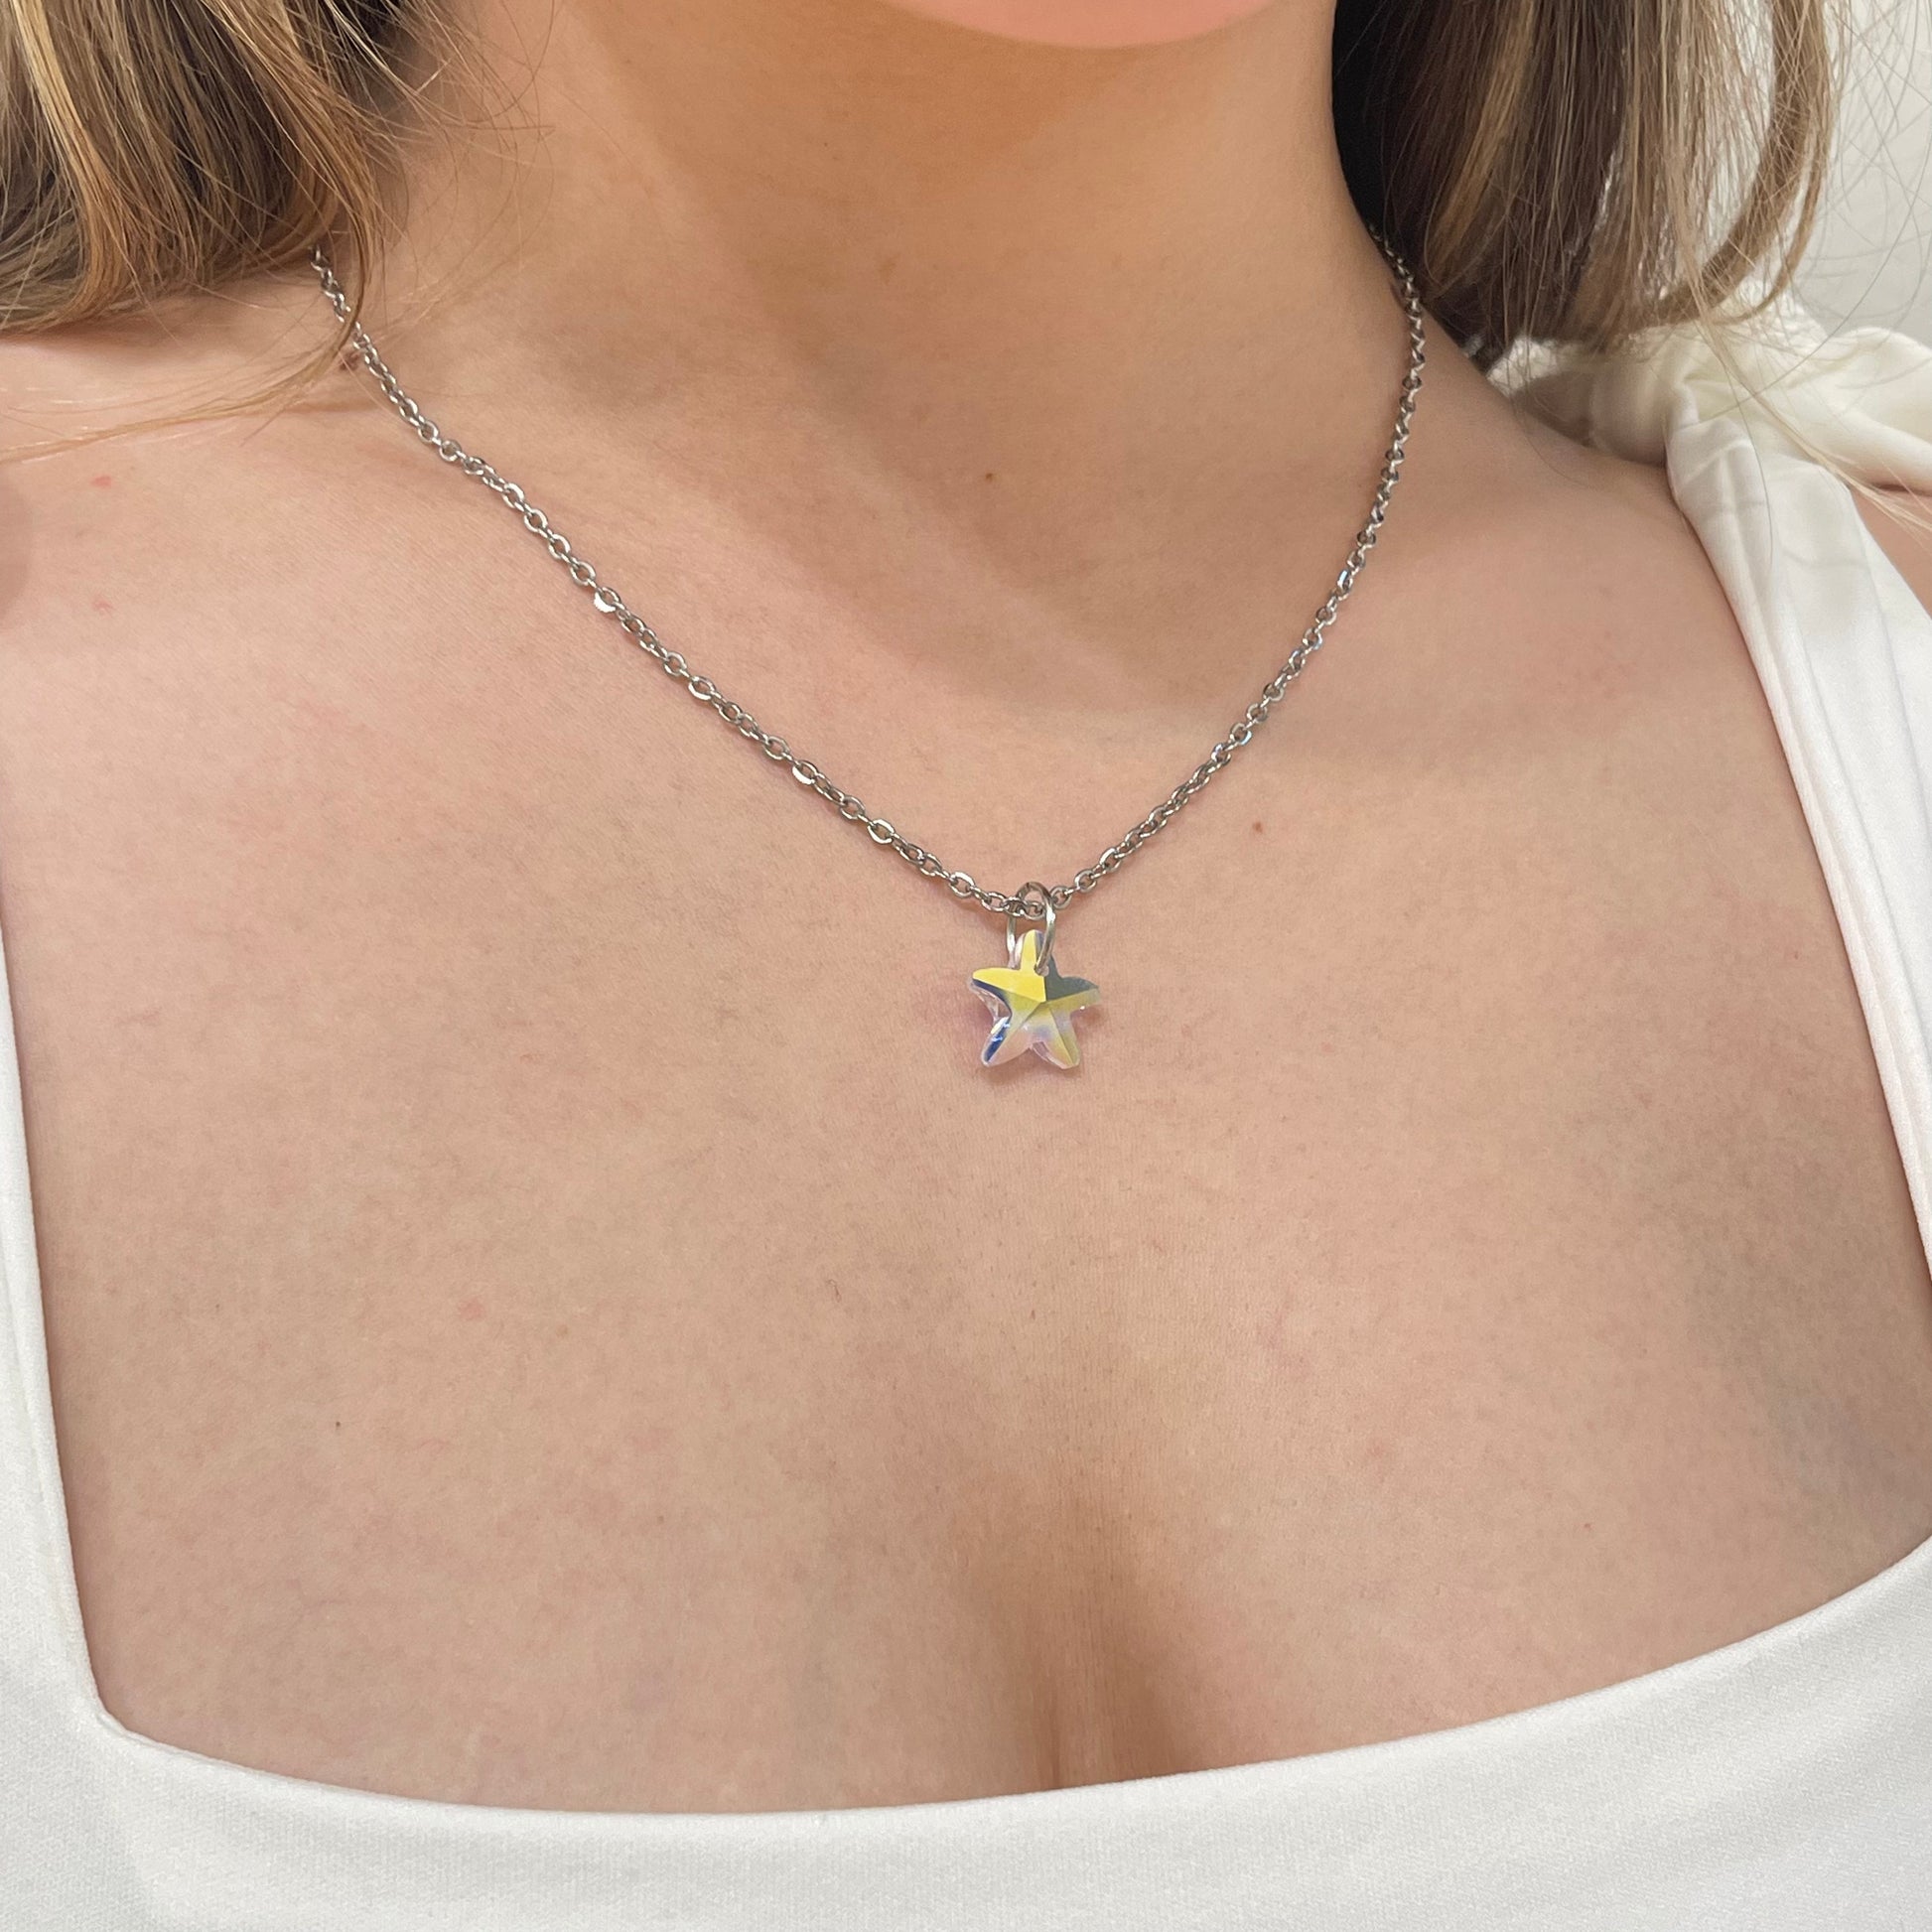 Iridescent Crystal Star Necklace